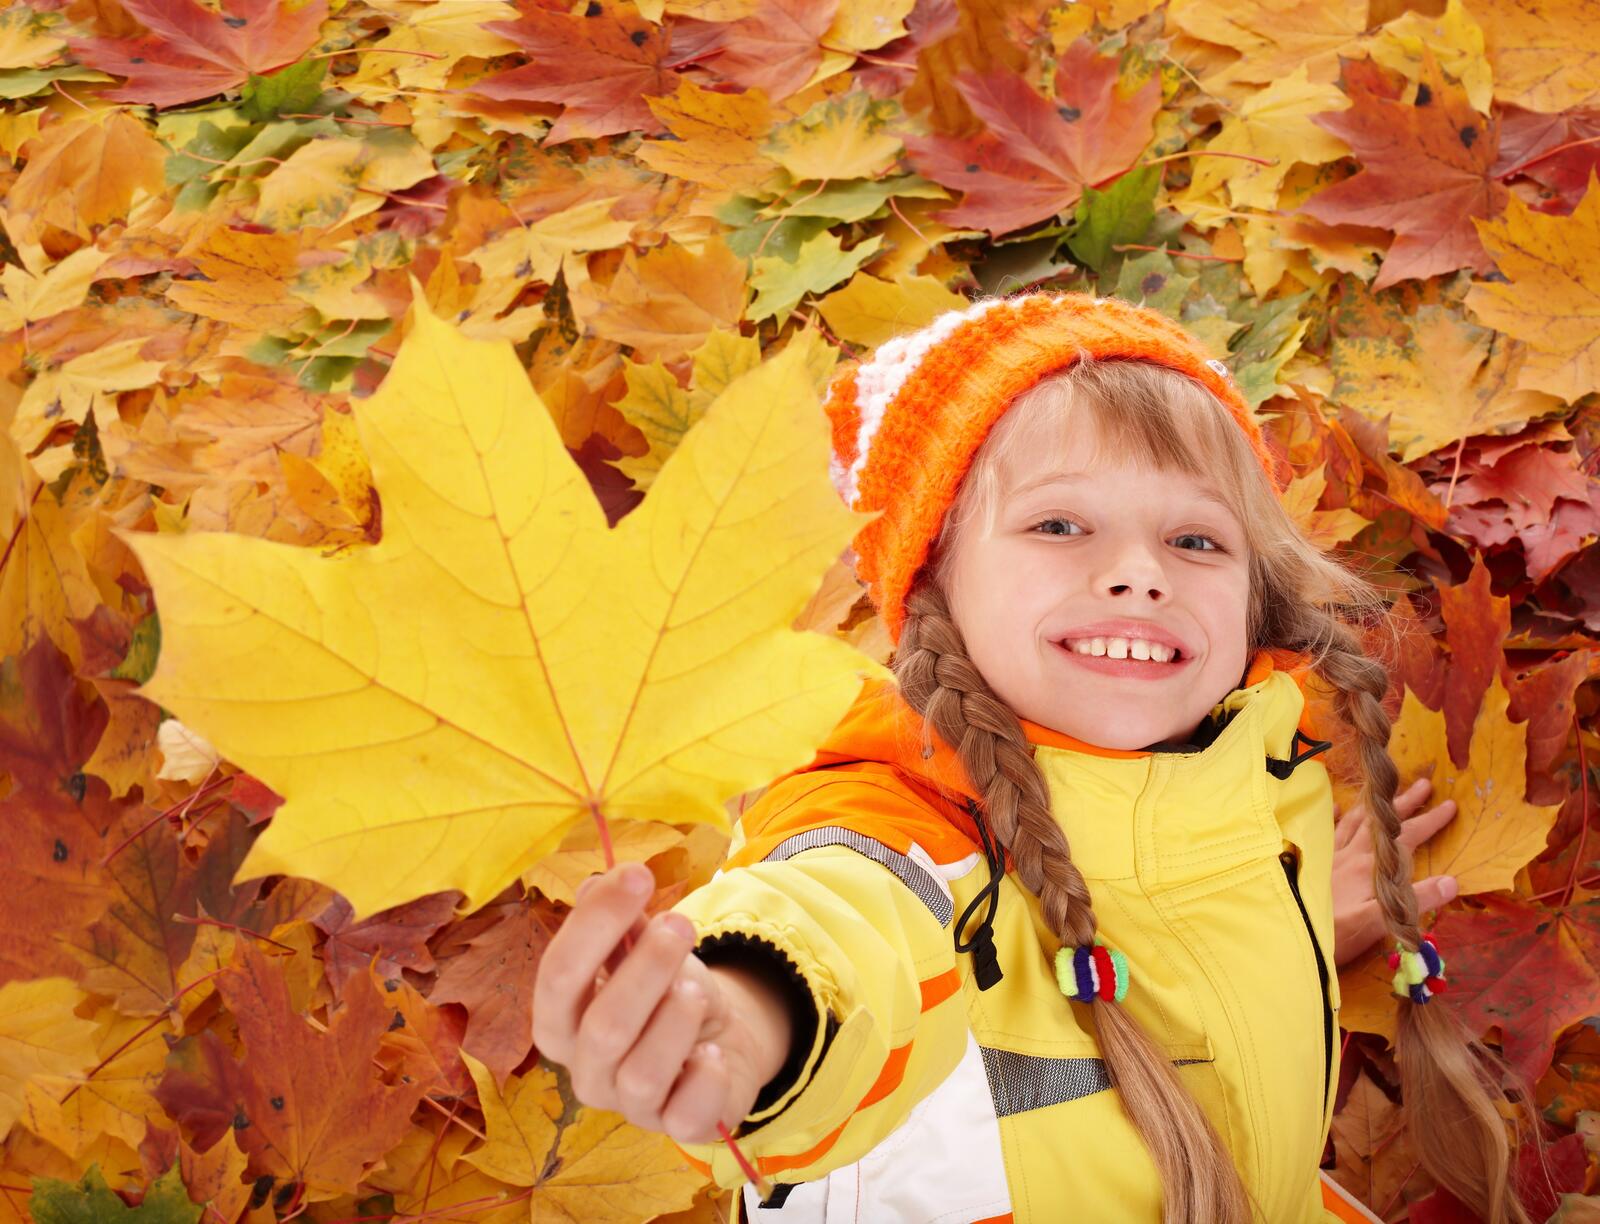 Free photo A girl playing with fallen leaves